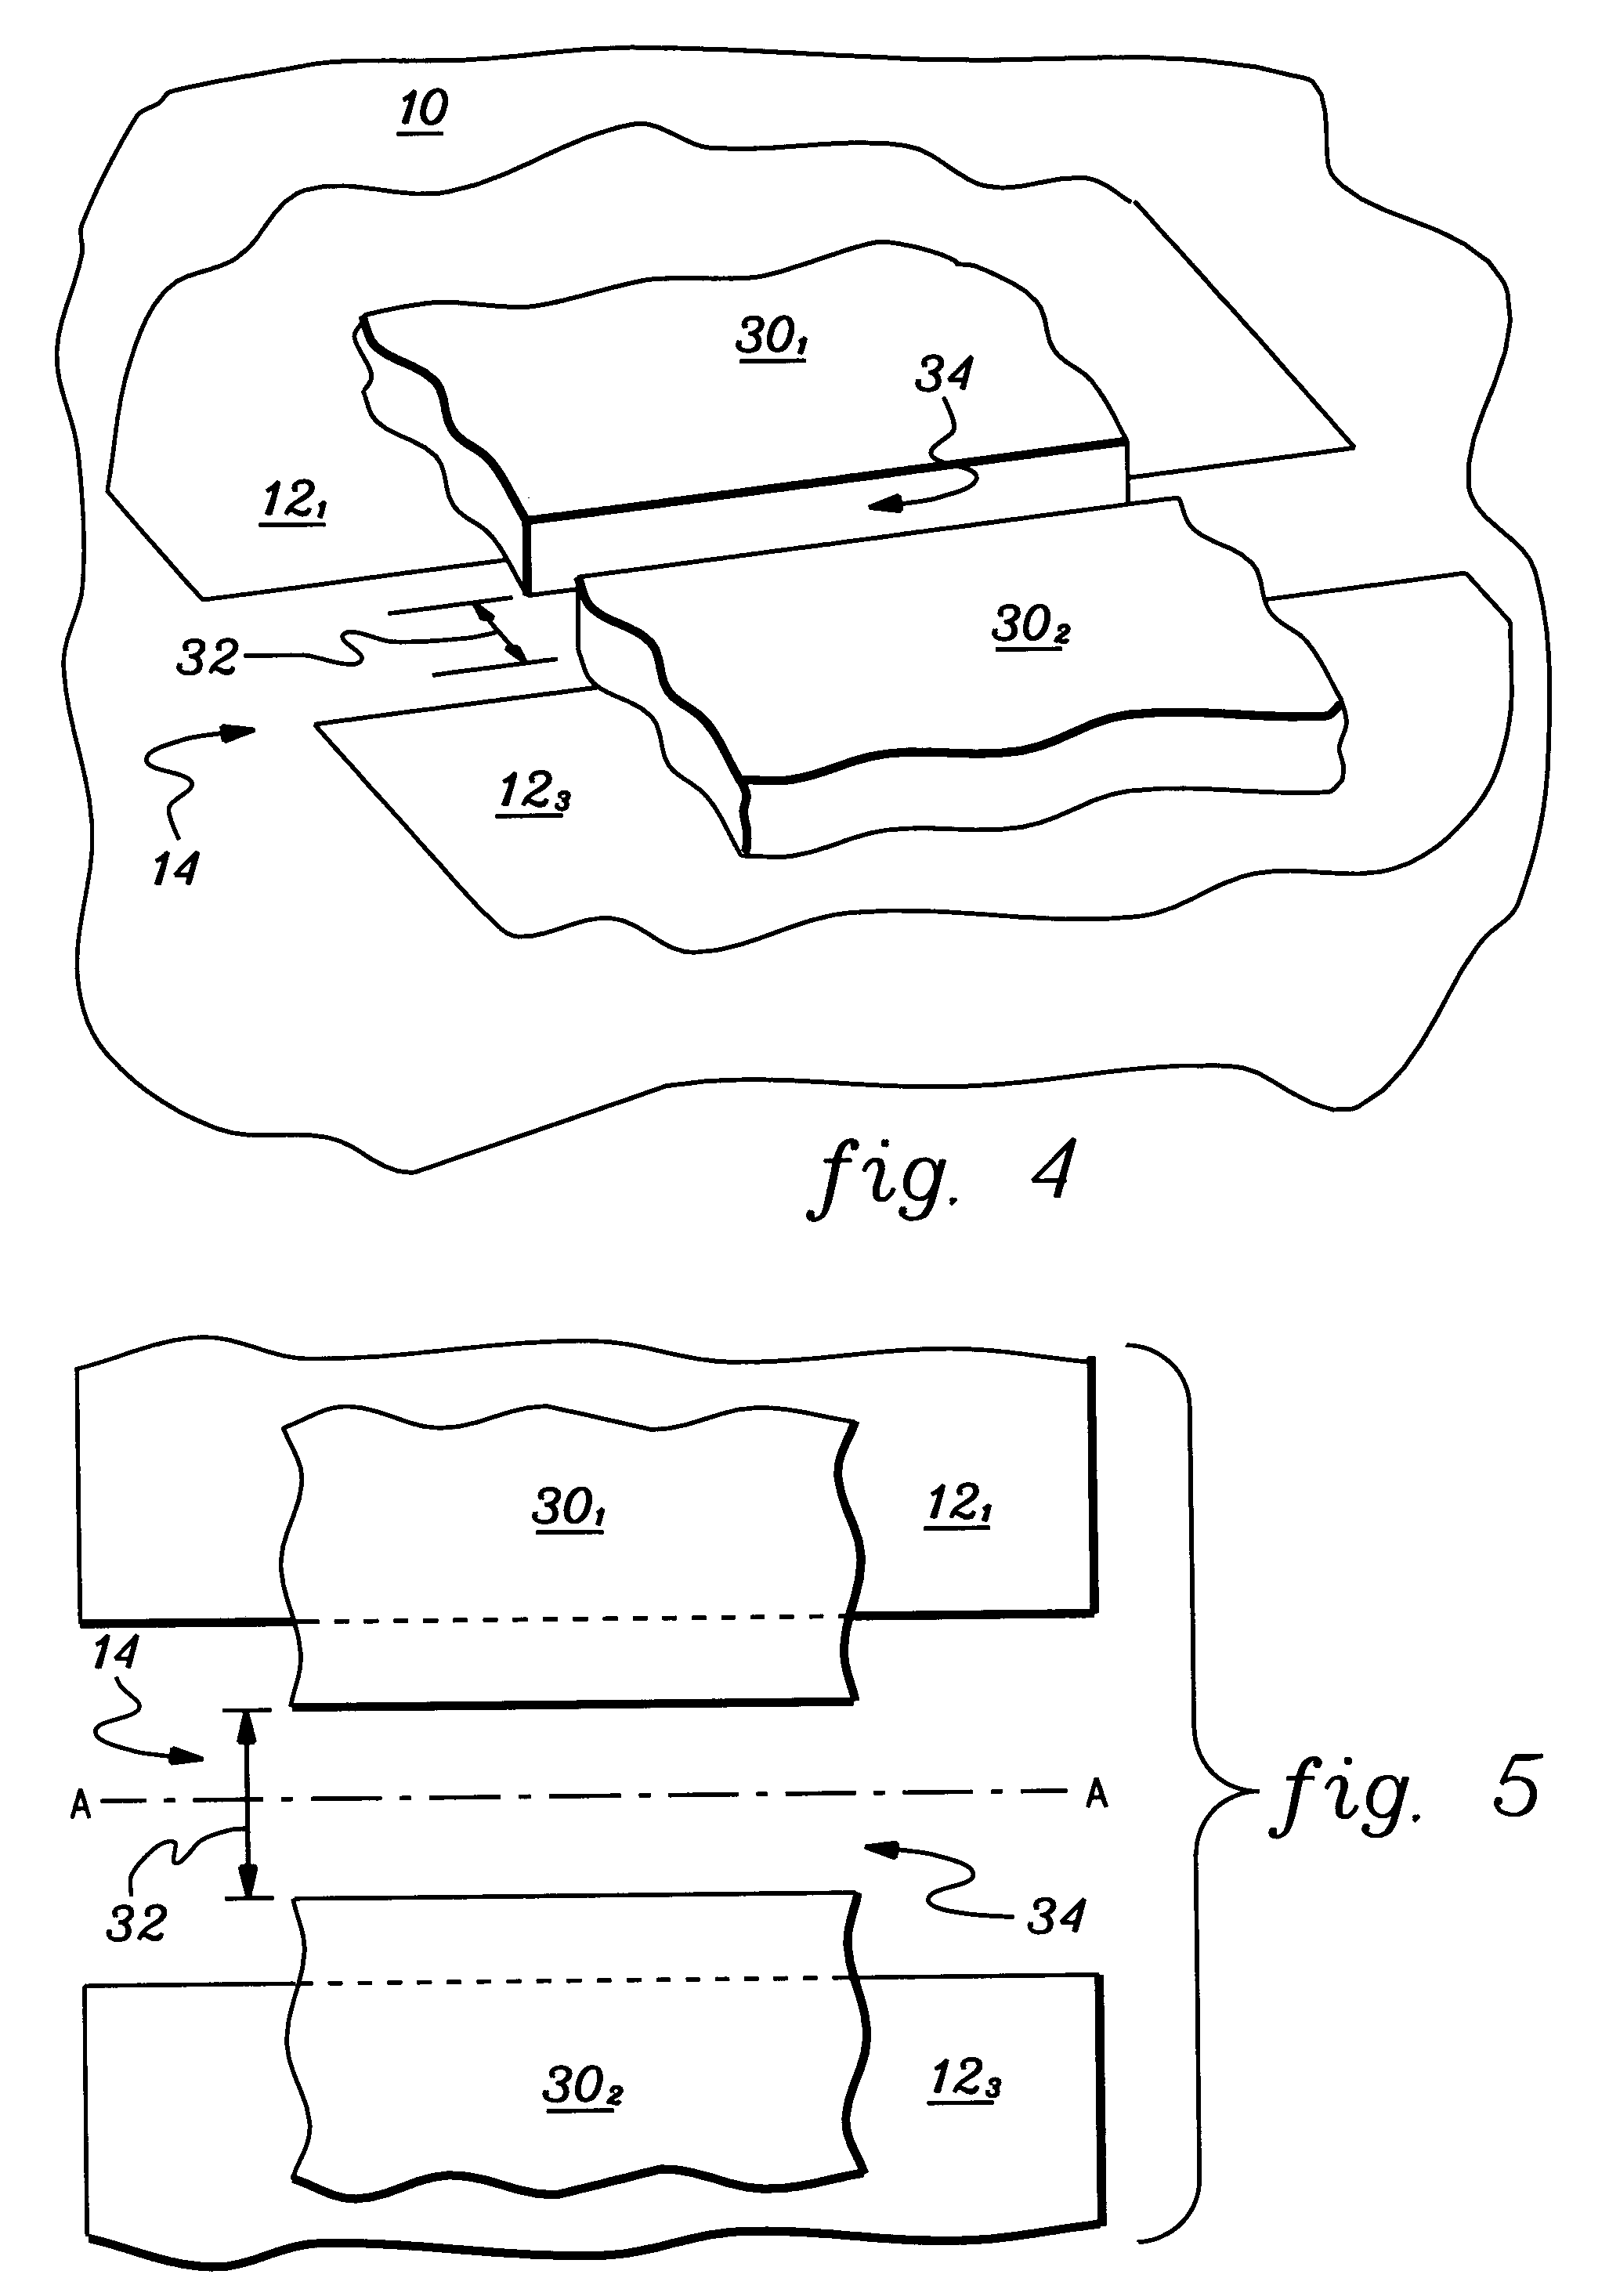 X-ray fluorescence system with apertured mask for analyzing patterned surfaces